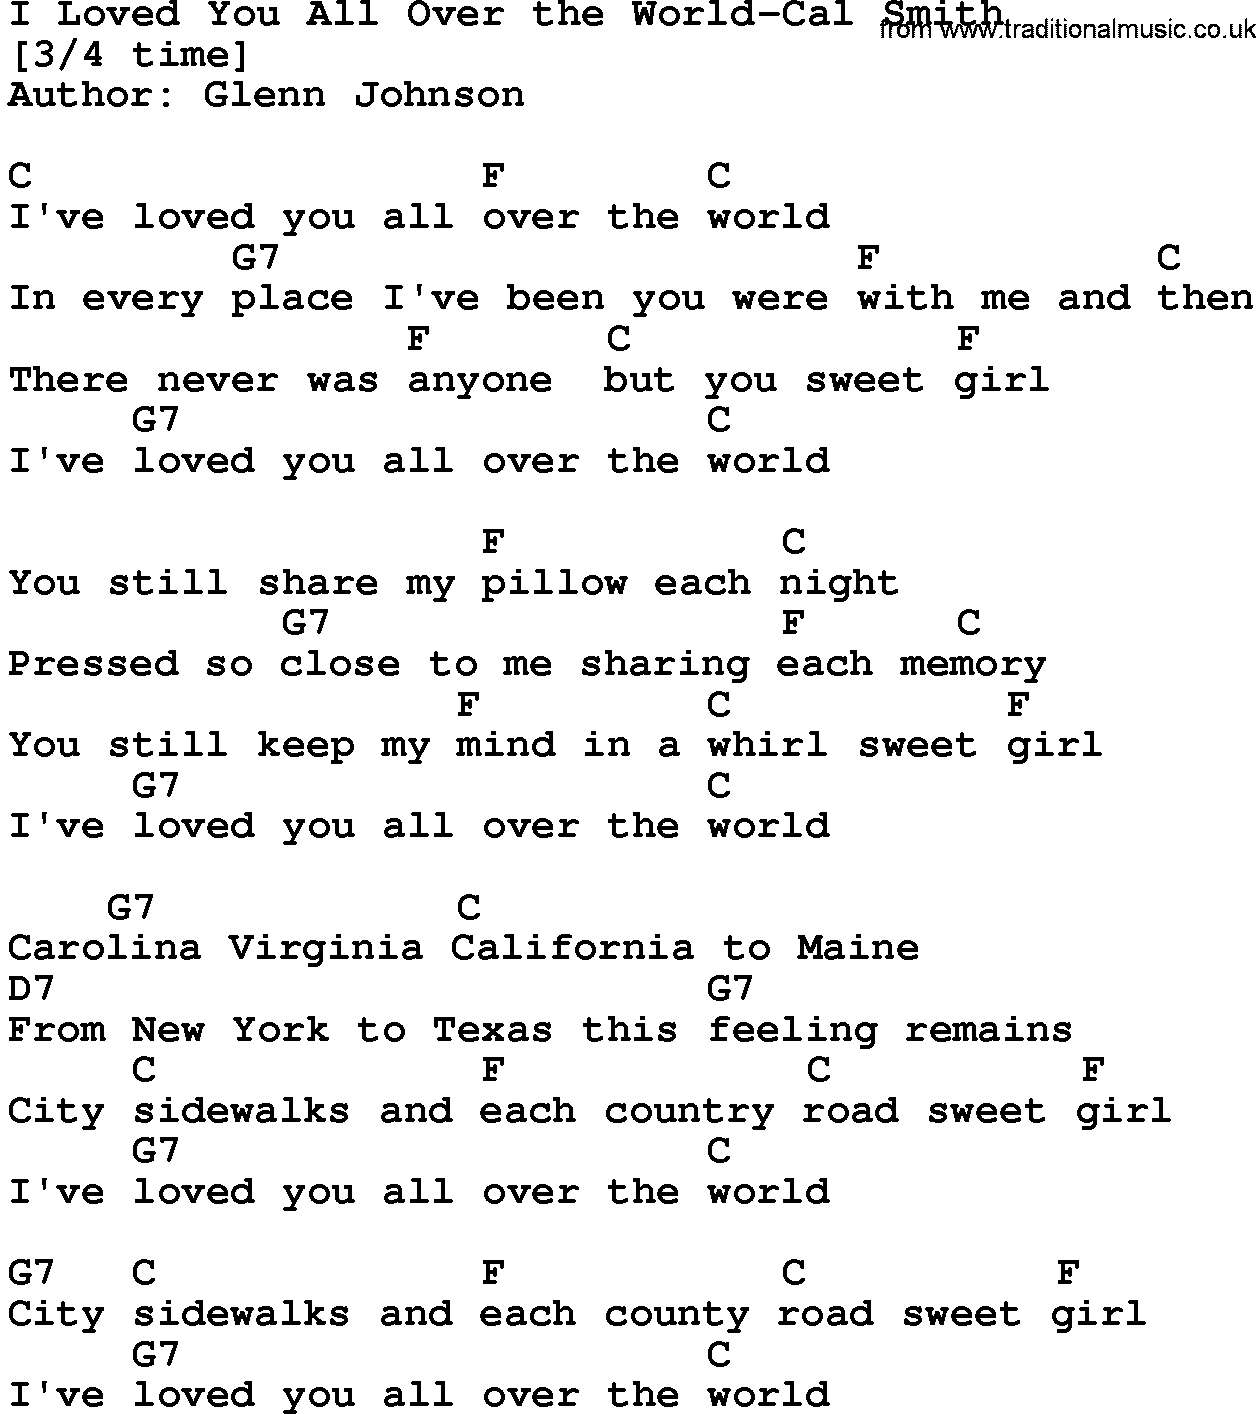 Country music song: I Loved You All Over The World-Cal Smith lyrics and chords